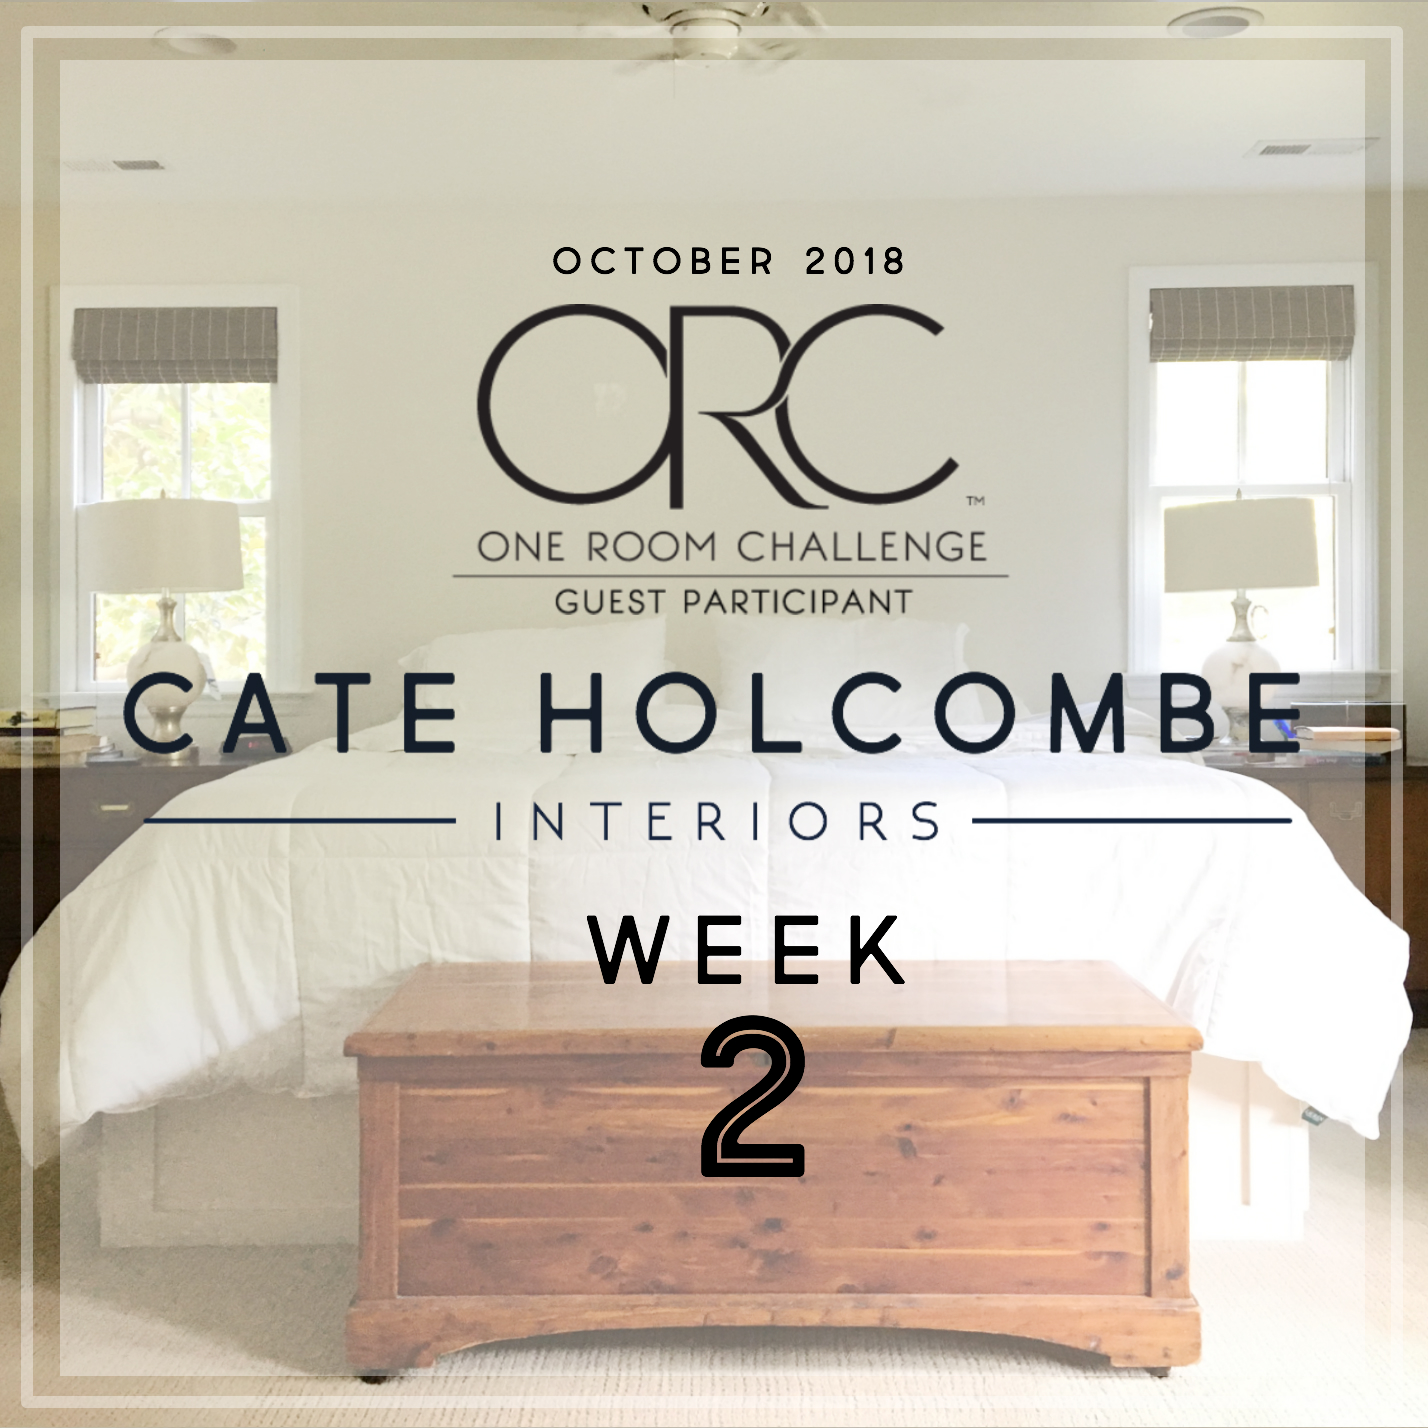 ORC Cate Holcombe Interiors Week 2